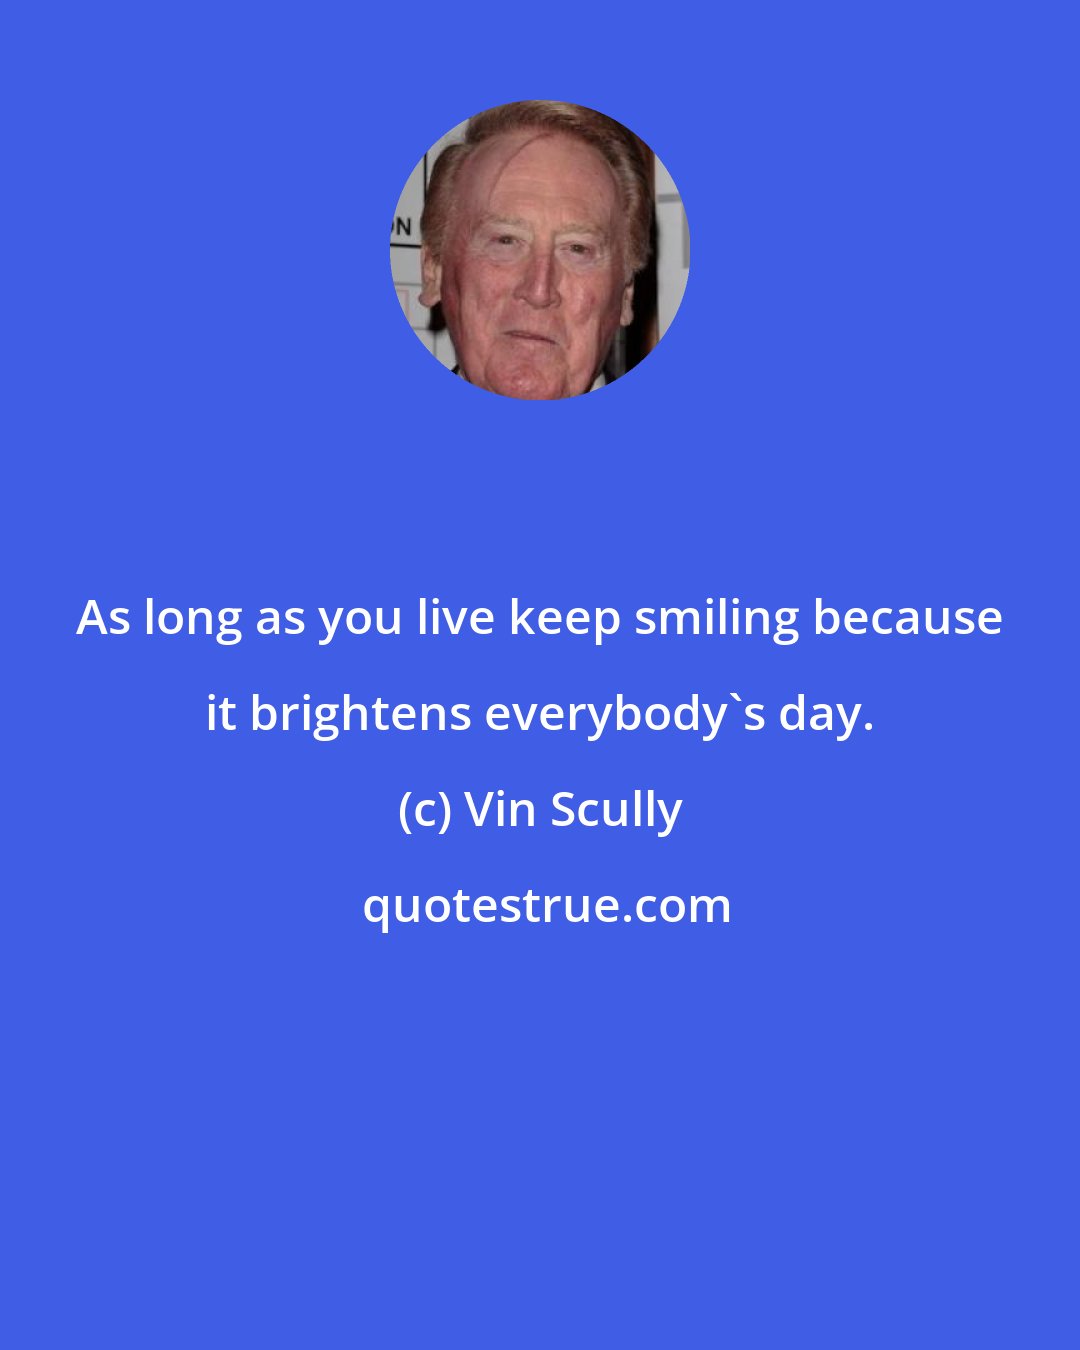 Vin Scully: As long as you live keep smiling because it brightens everybody's day.